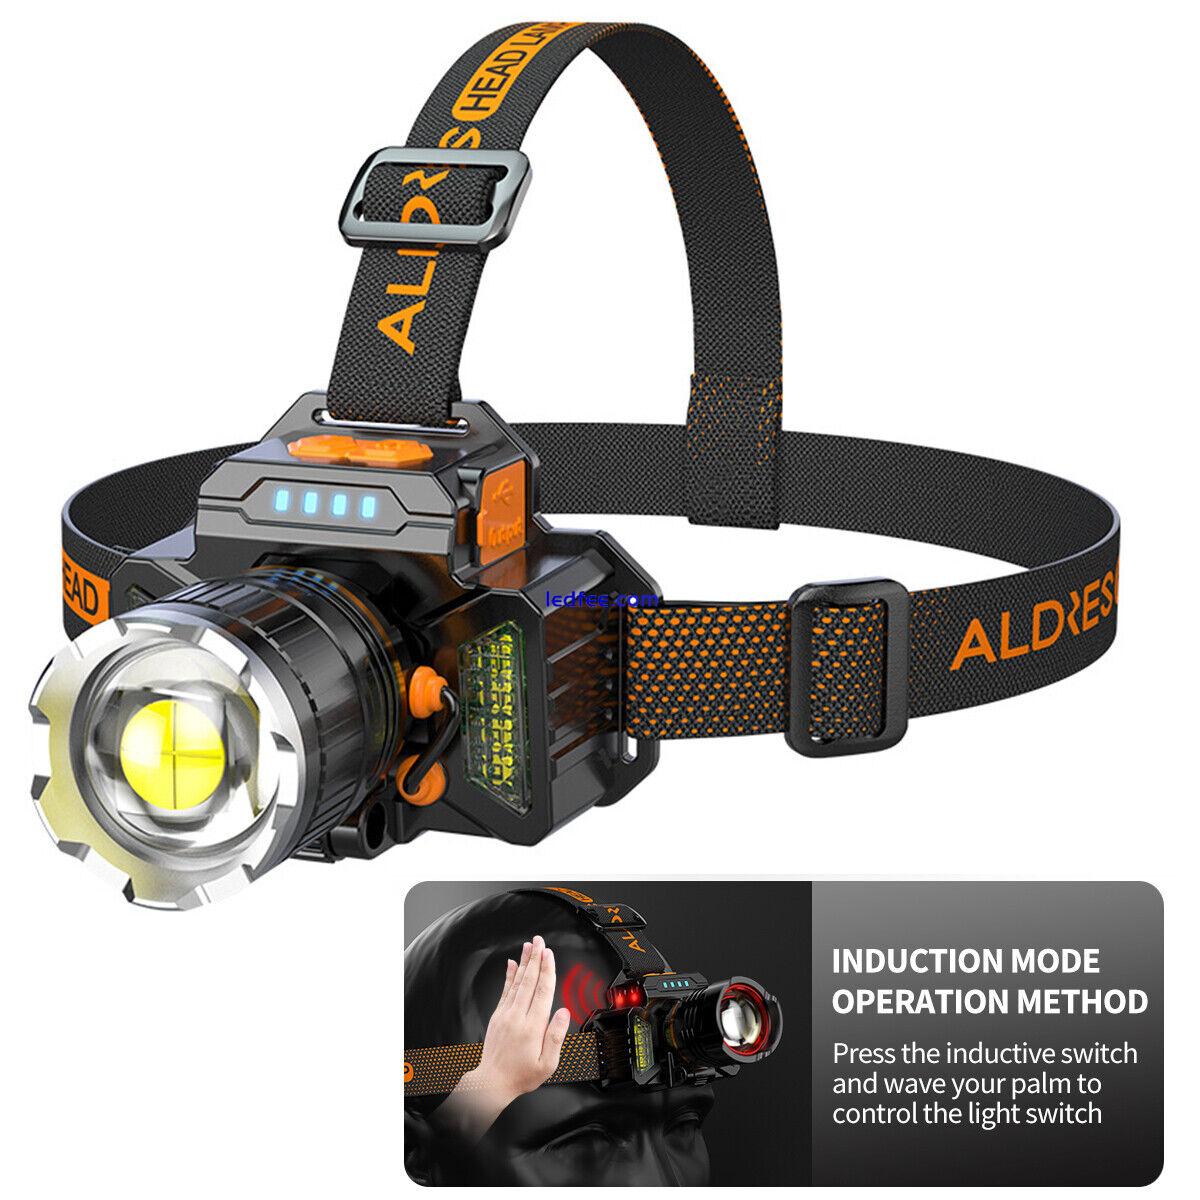 New Super Bright USB Rechargeable Headlamp Waterproof LED Head Torch Headlight 3 